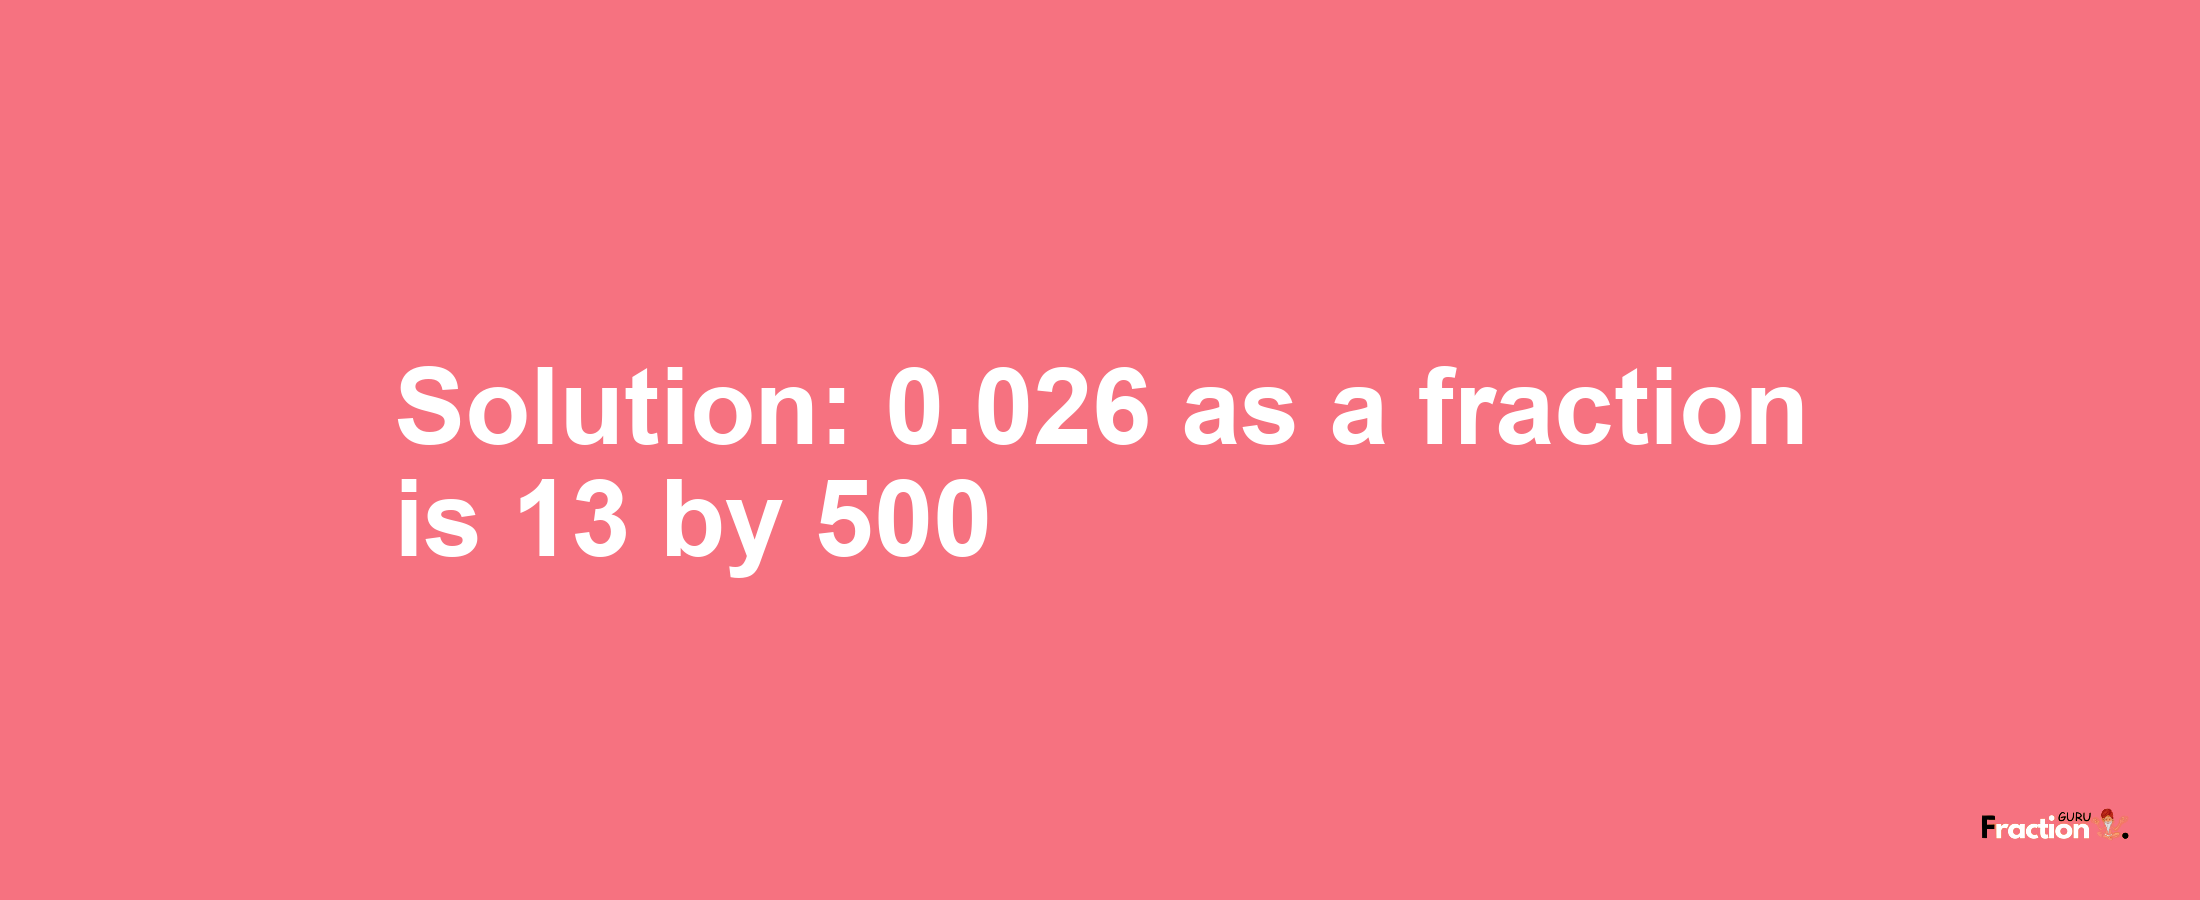 Solution:0.026 as a fraction is 13/500